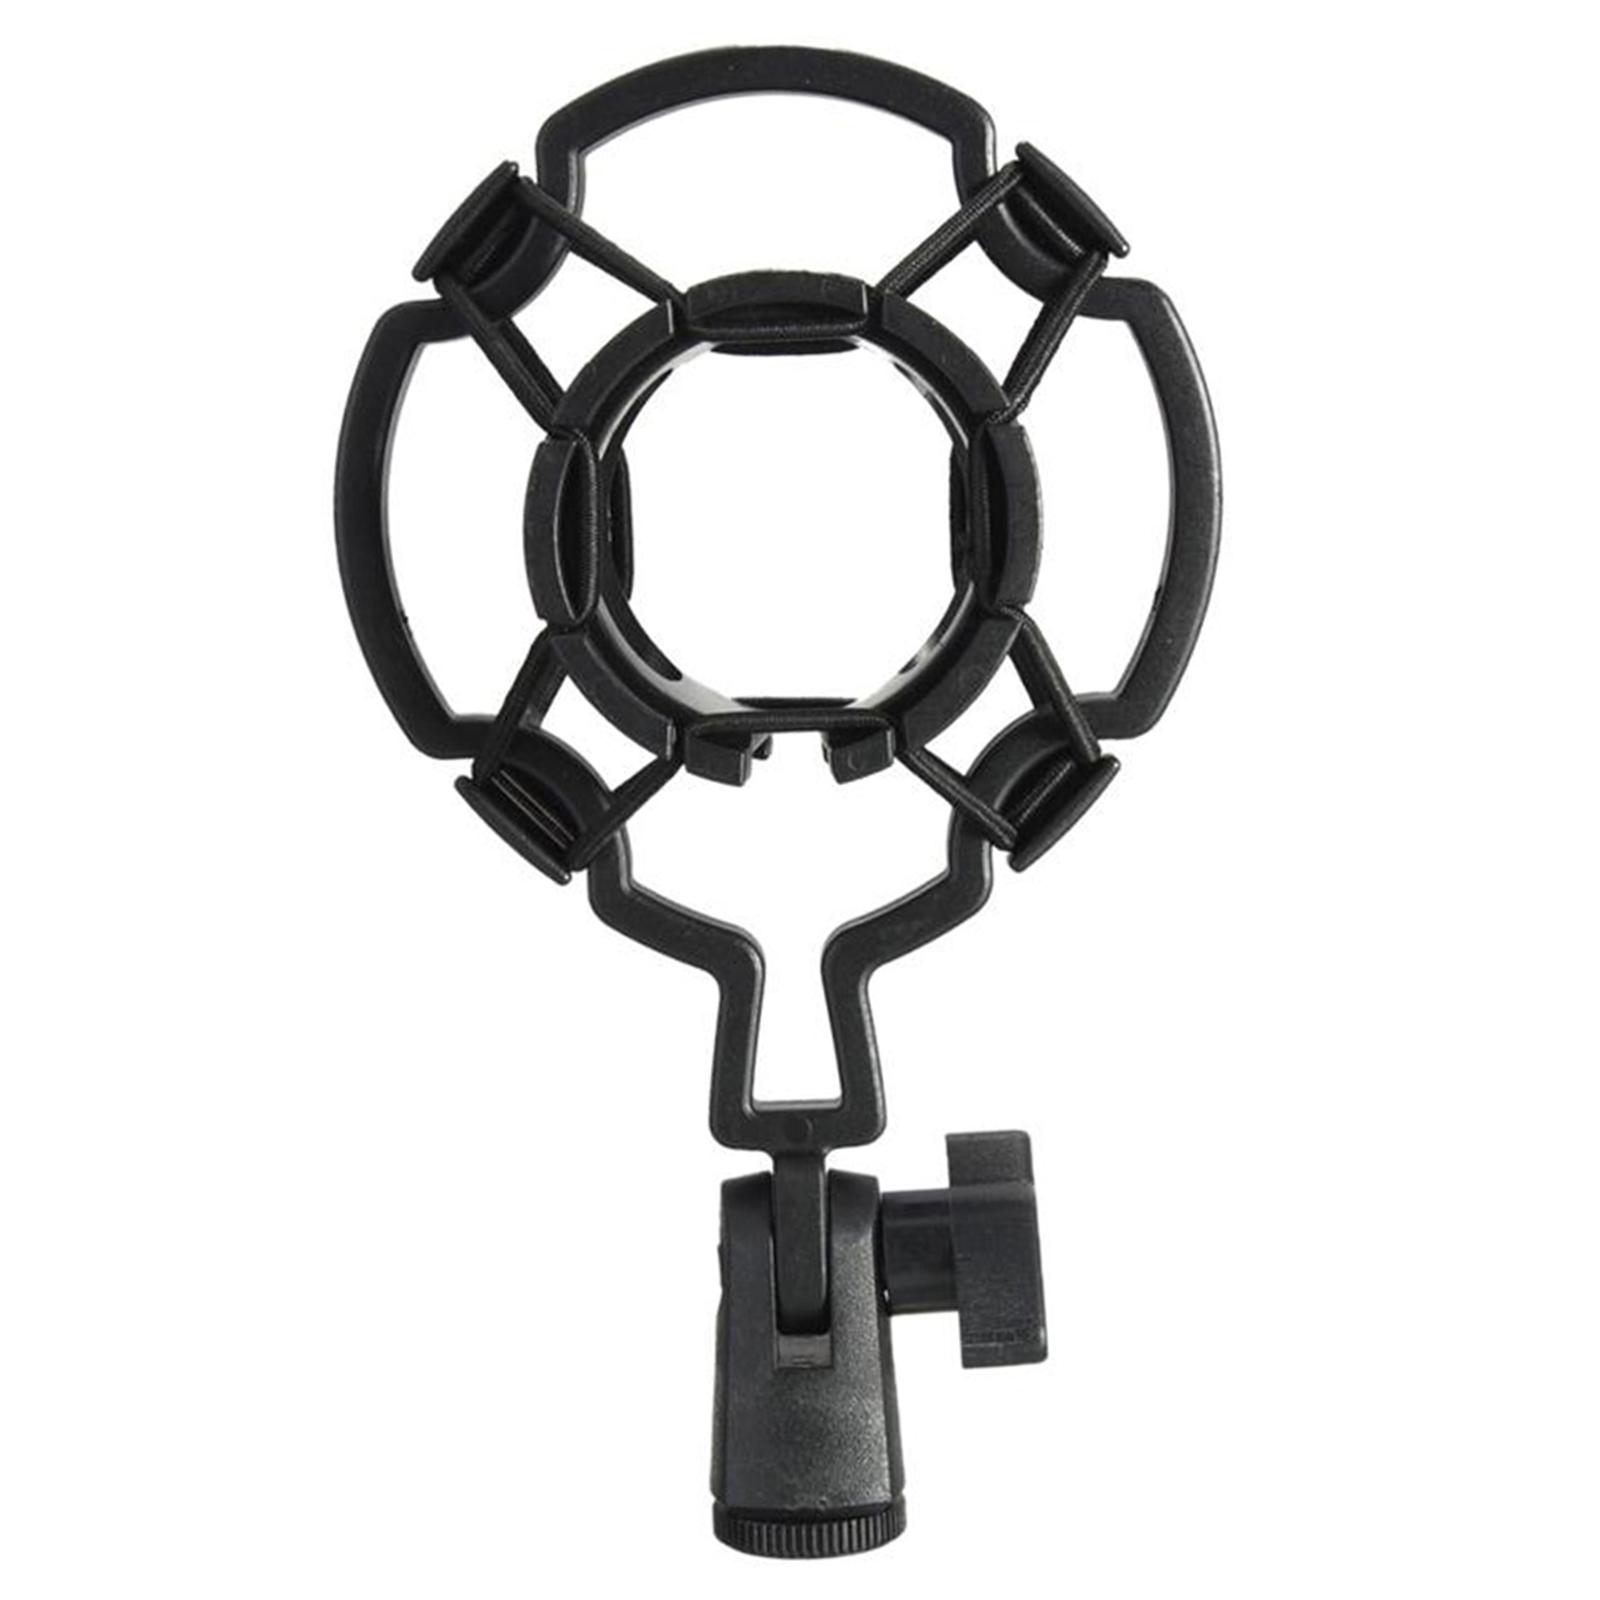 TOMTOP JMS Universal Shock-proof Microphone Mount Plastic Studio Mic Holder Stand Clip For Large Diaphram